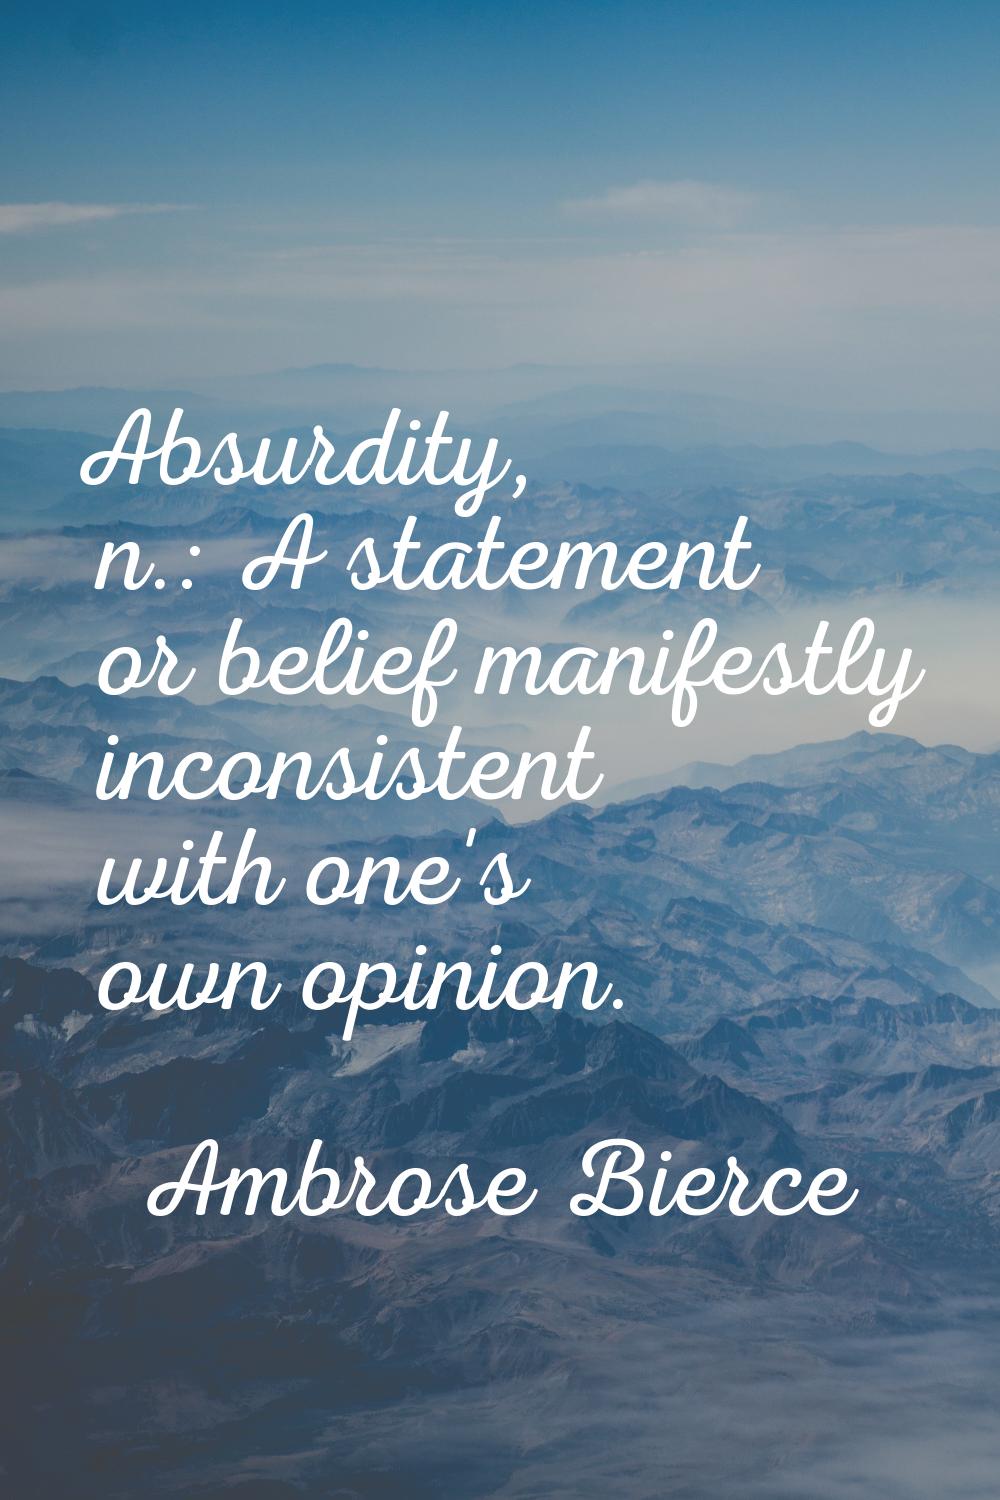 Absurdity, n.: A statement or belief manifestly inconsistent with one's own opinion.